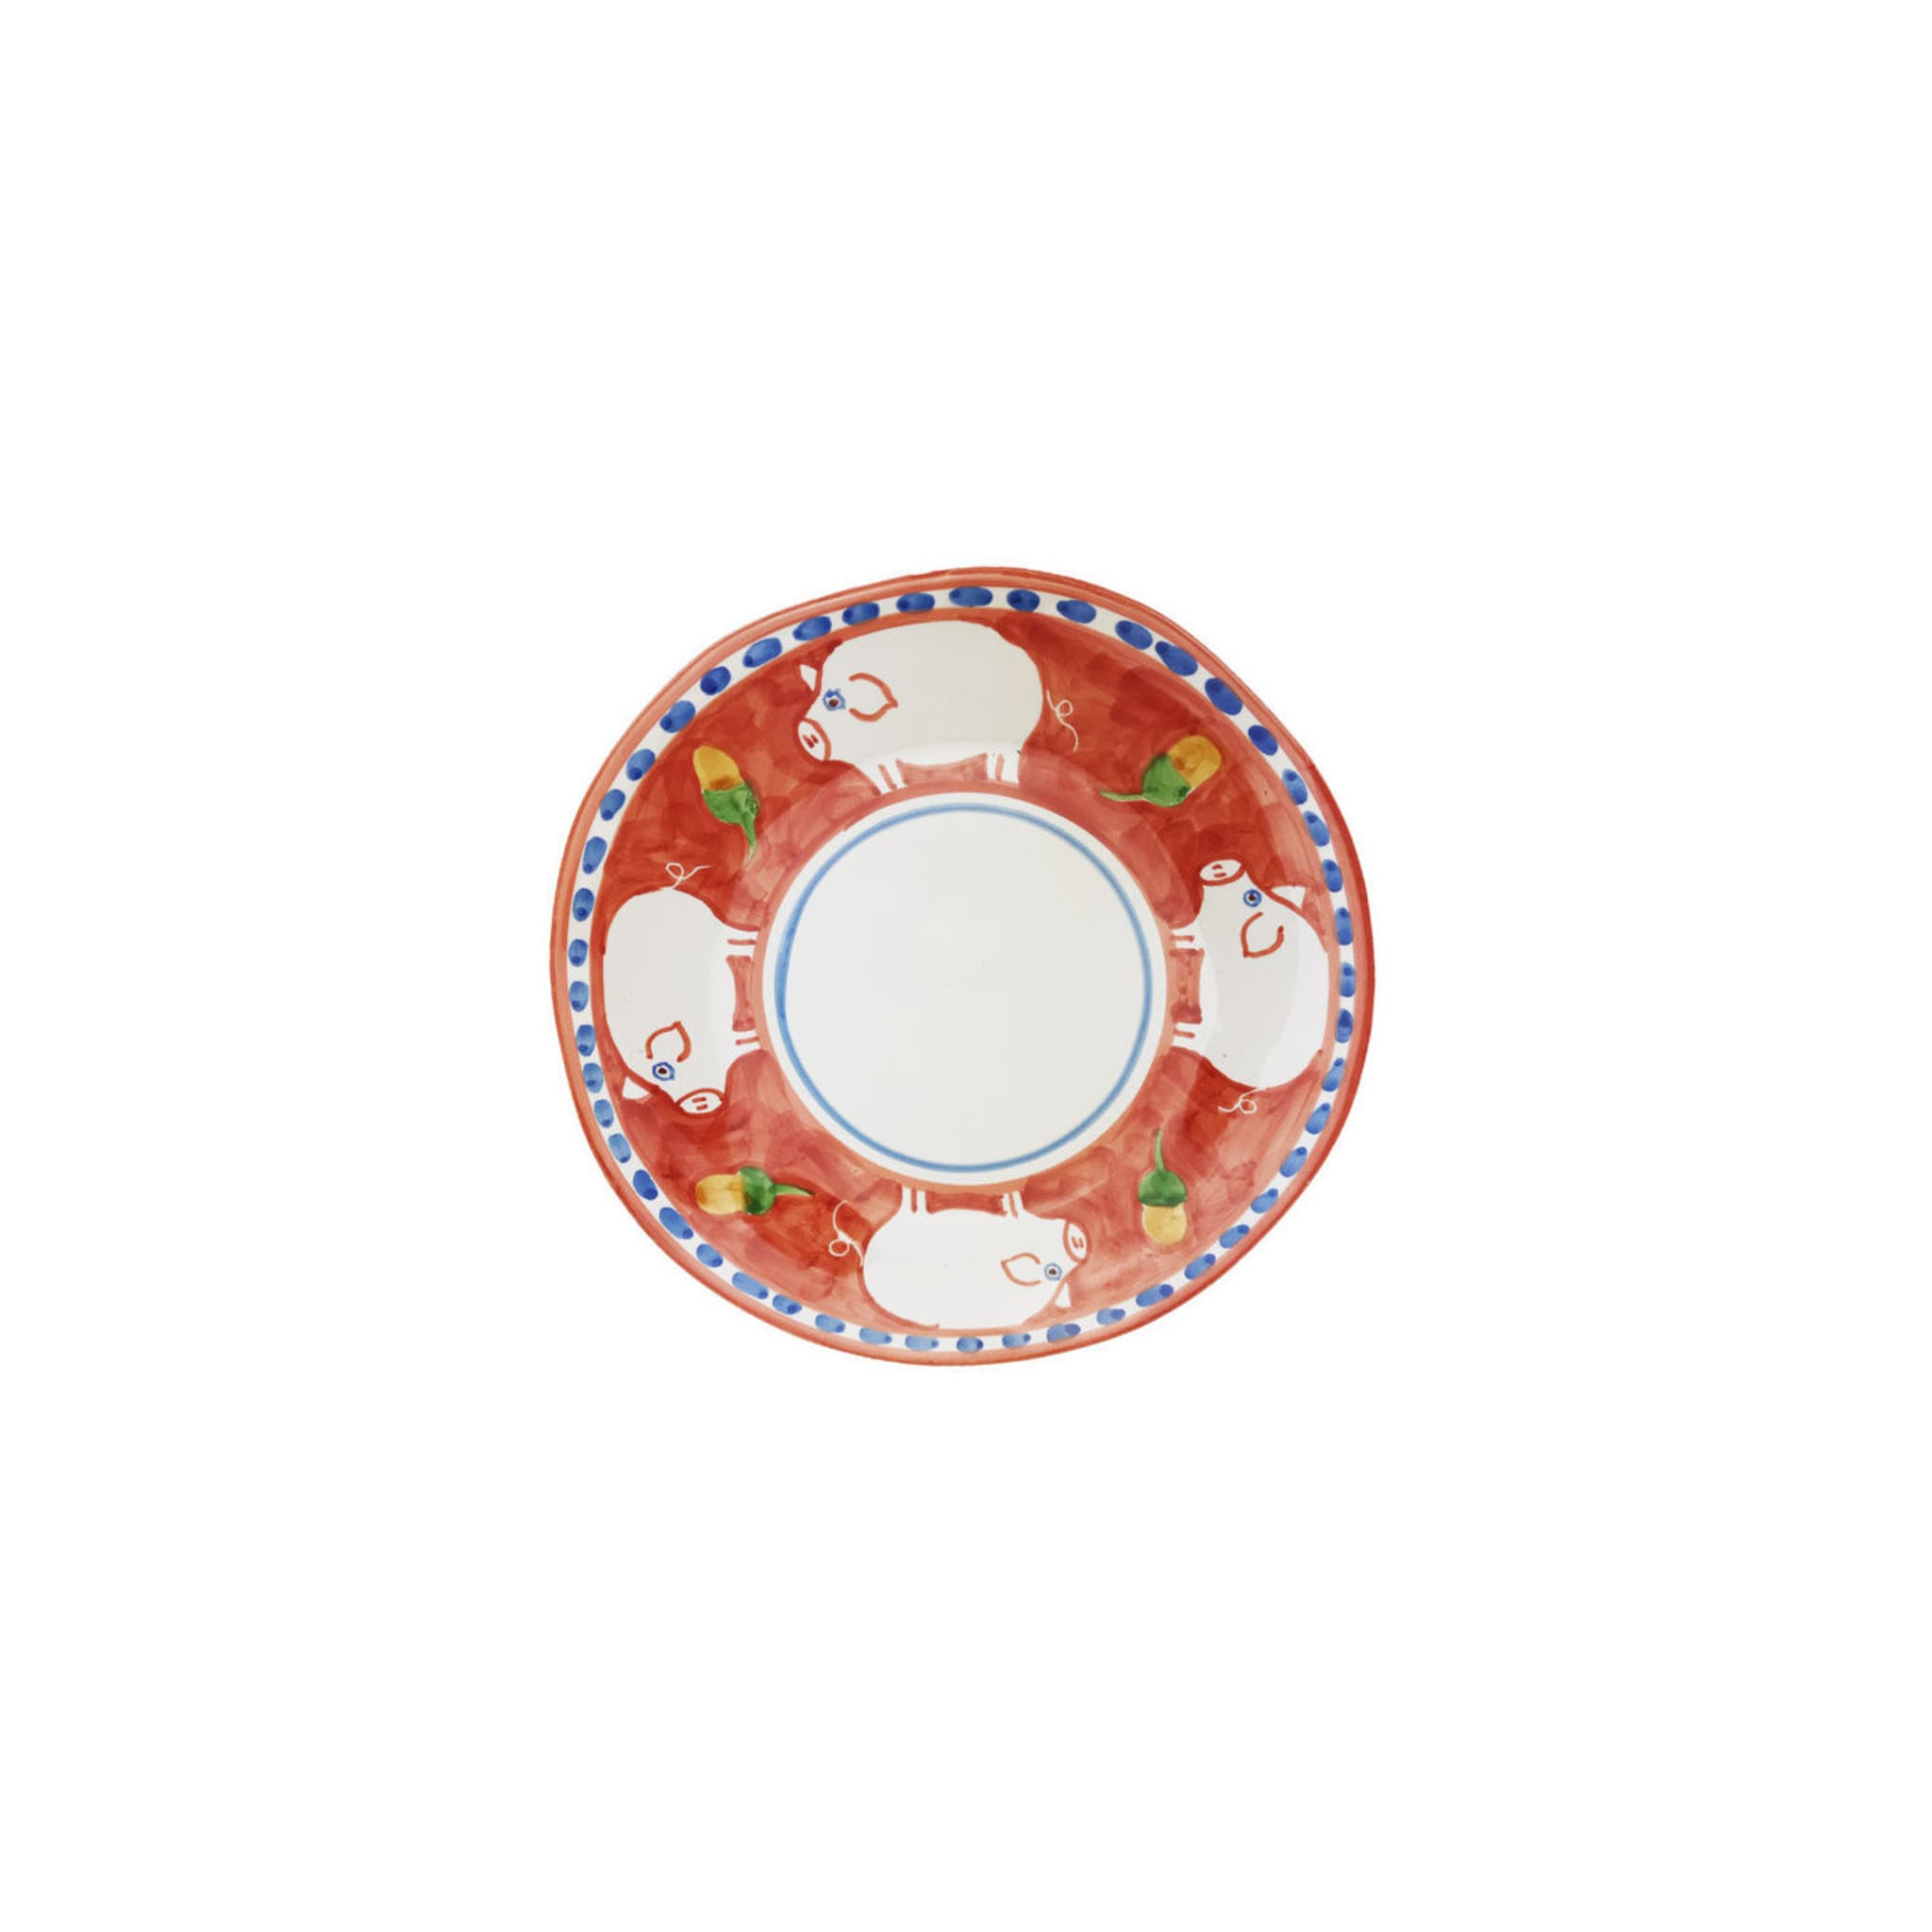 Cortile 18-Piece Red Plate Setting - Alternative view 1